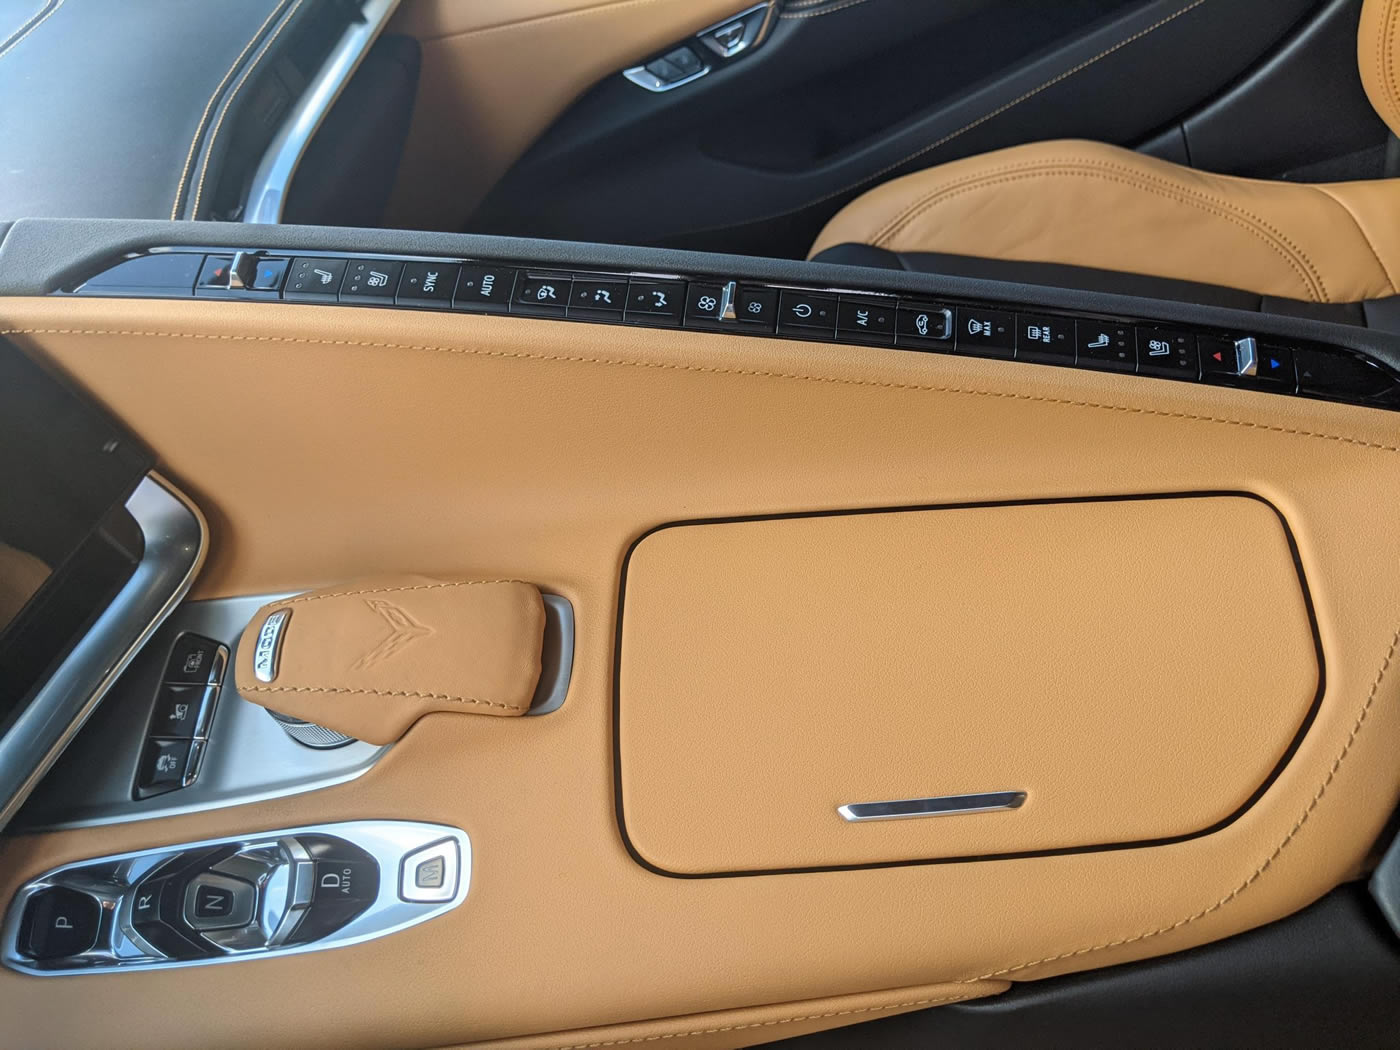 2021 Corvette Coupe in Red Mist over Natural Two-Tone Interior